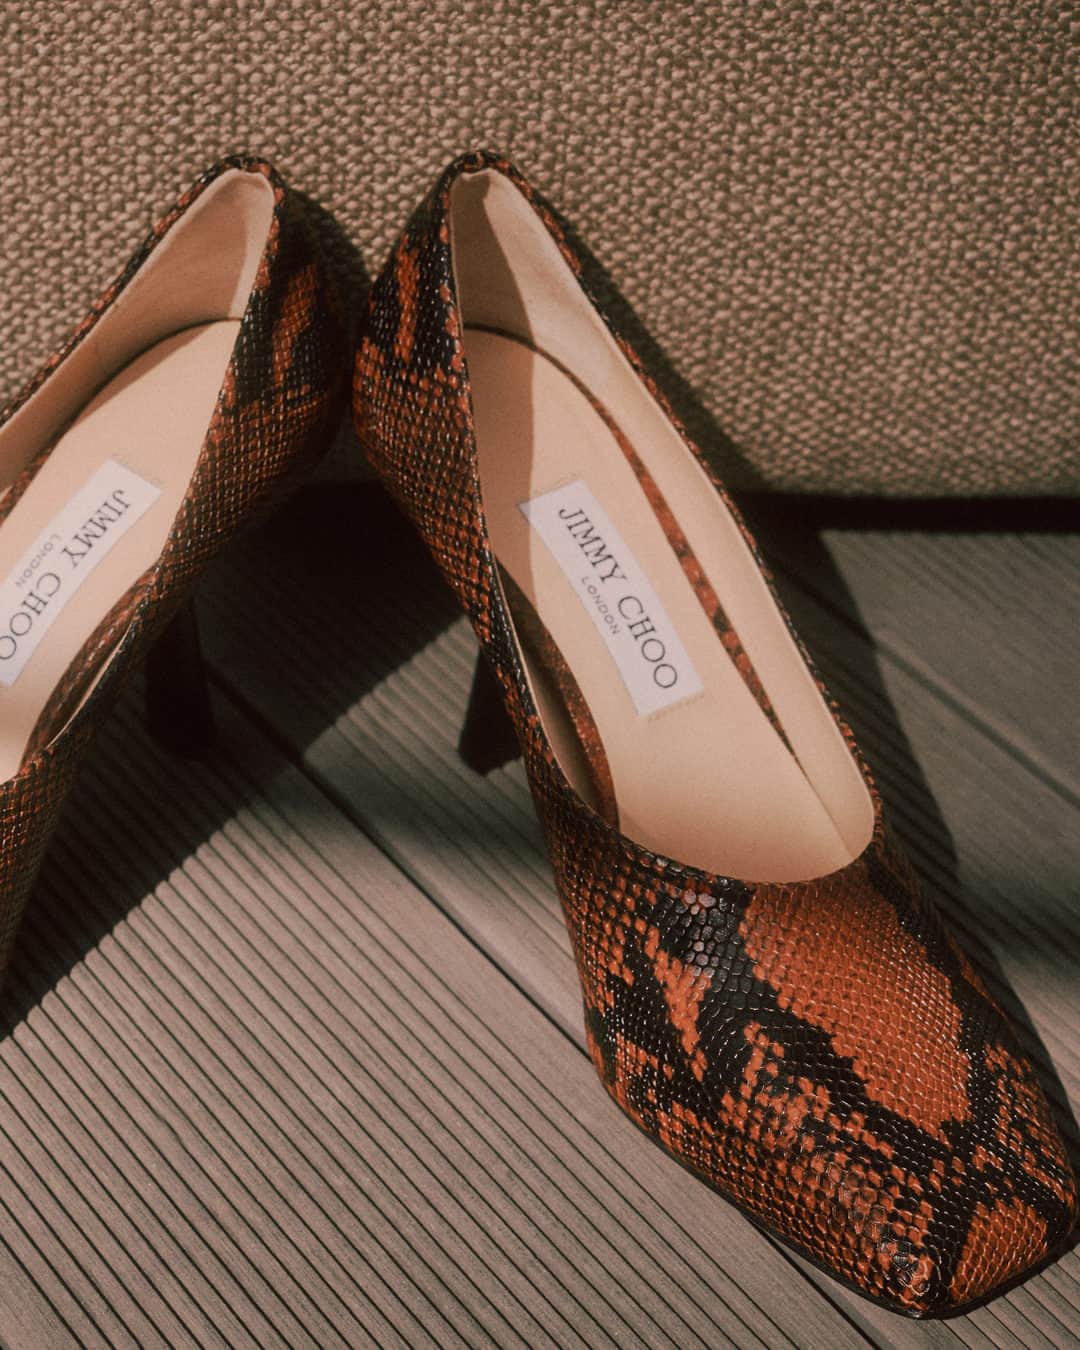 The Outnetのインスタグラム：「Embrace autumnal tones the right way with these square-toe heels from @jimmychoo - the snake-effect is a must for any fashion hot stepper」